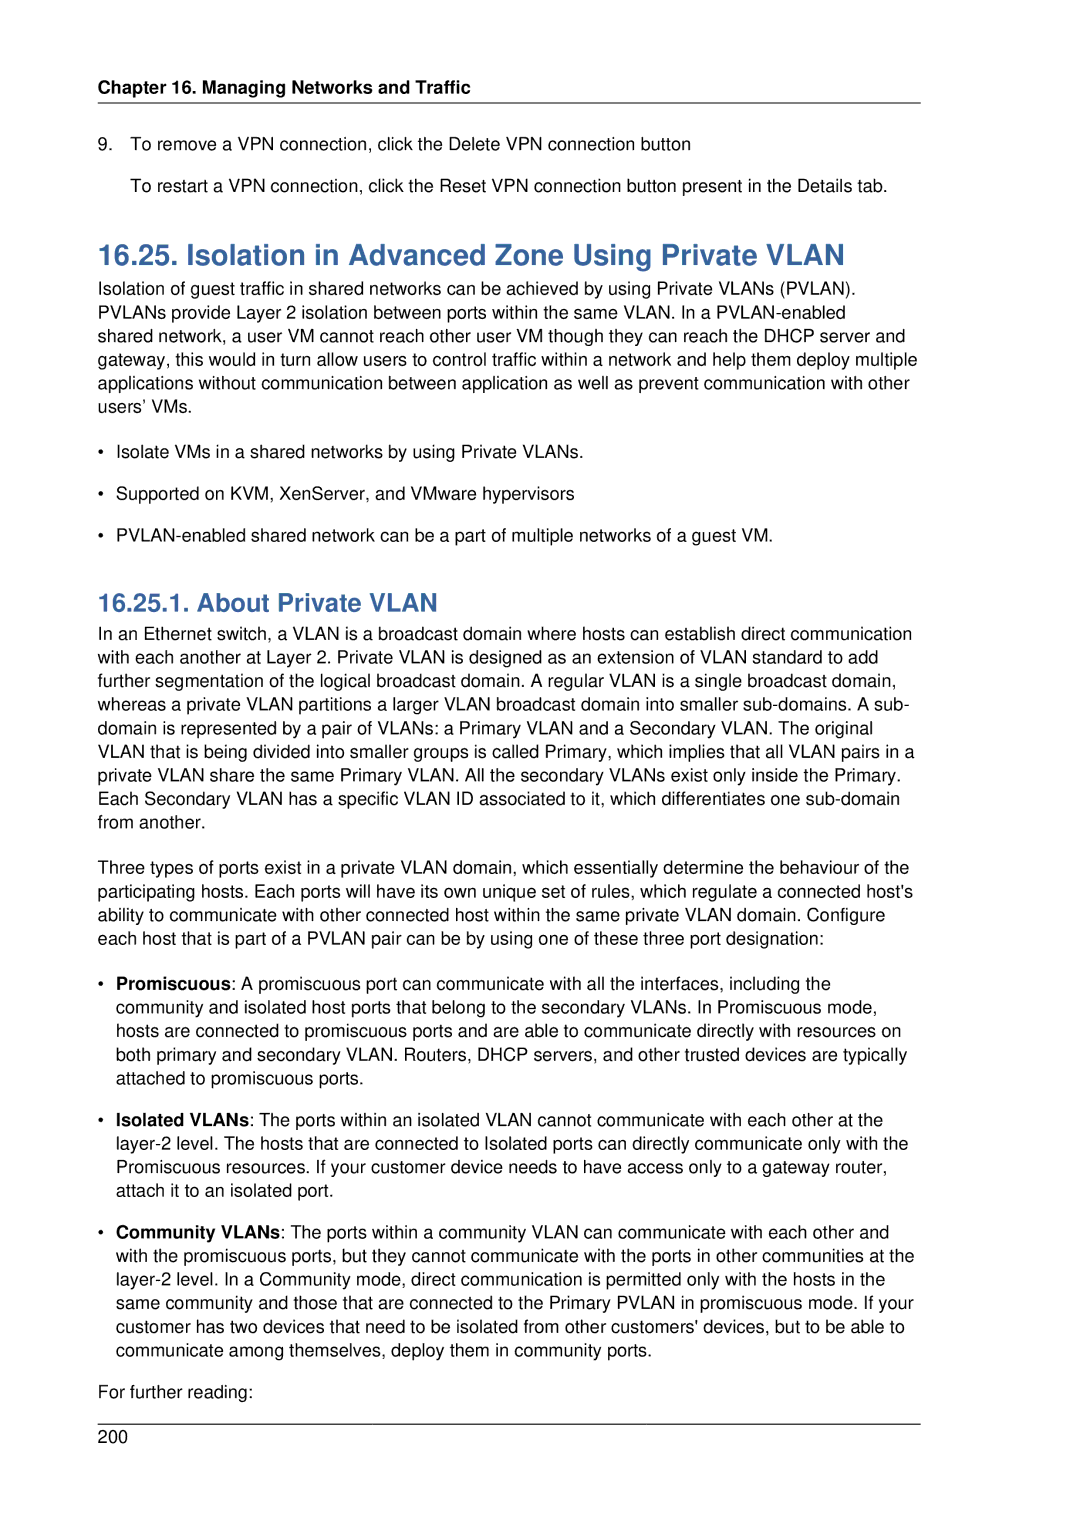 Citrix Systems 4.2 manual Isolation in Advanced Zone Using Private Vlan, About Private Vlan 